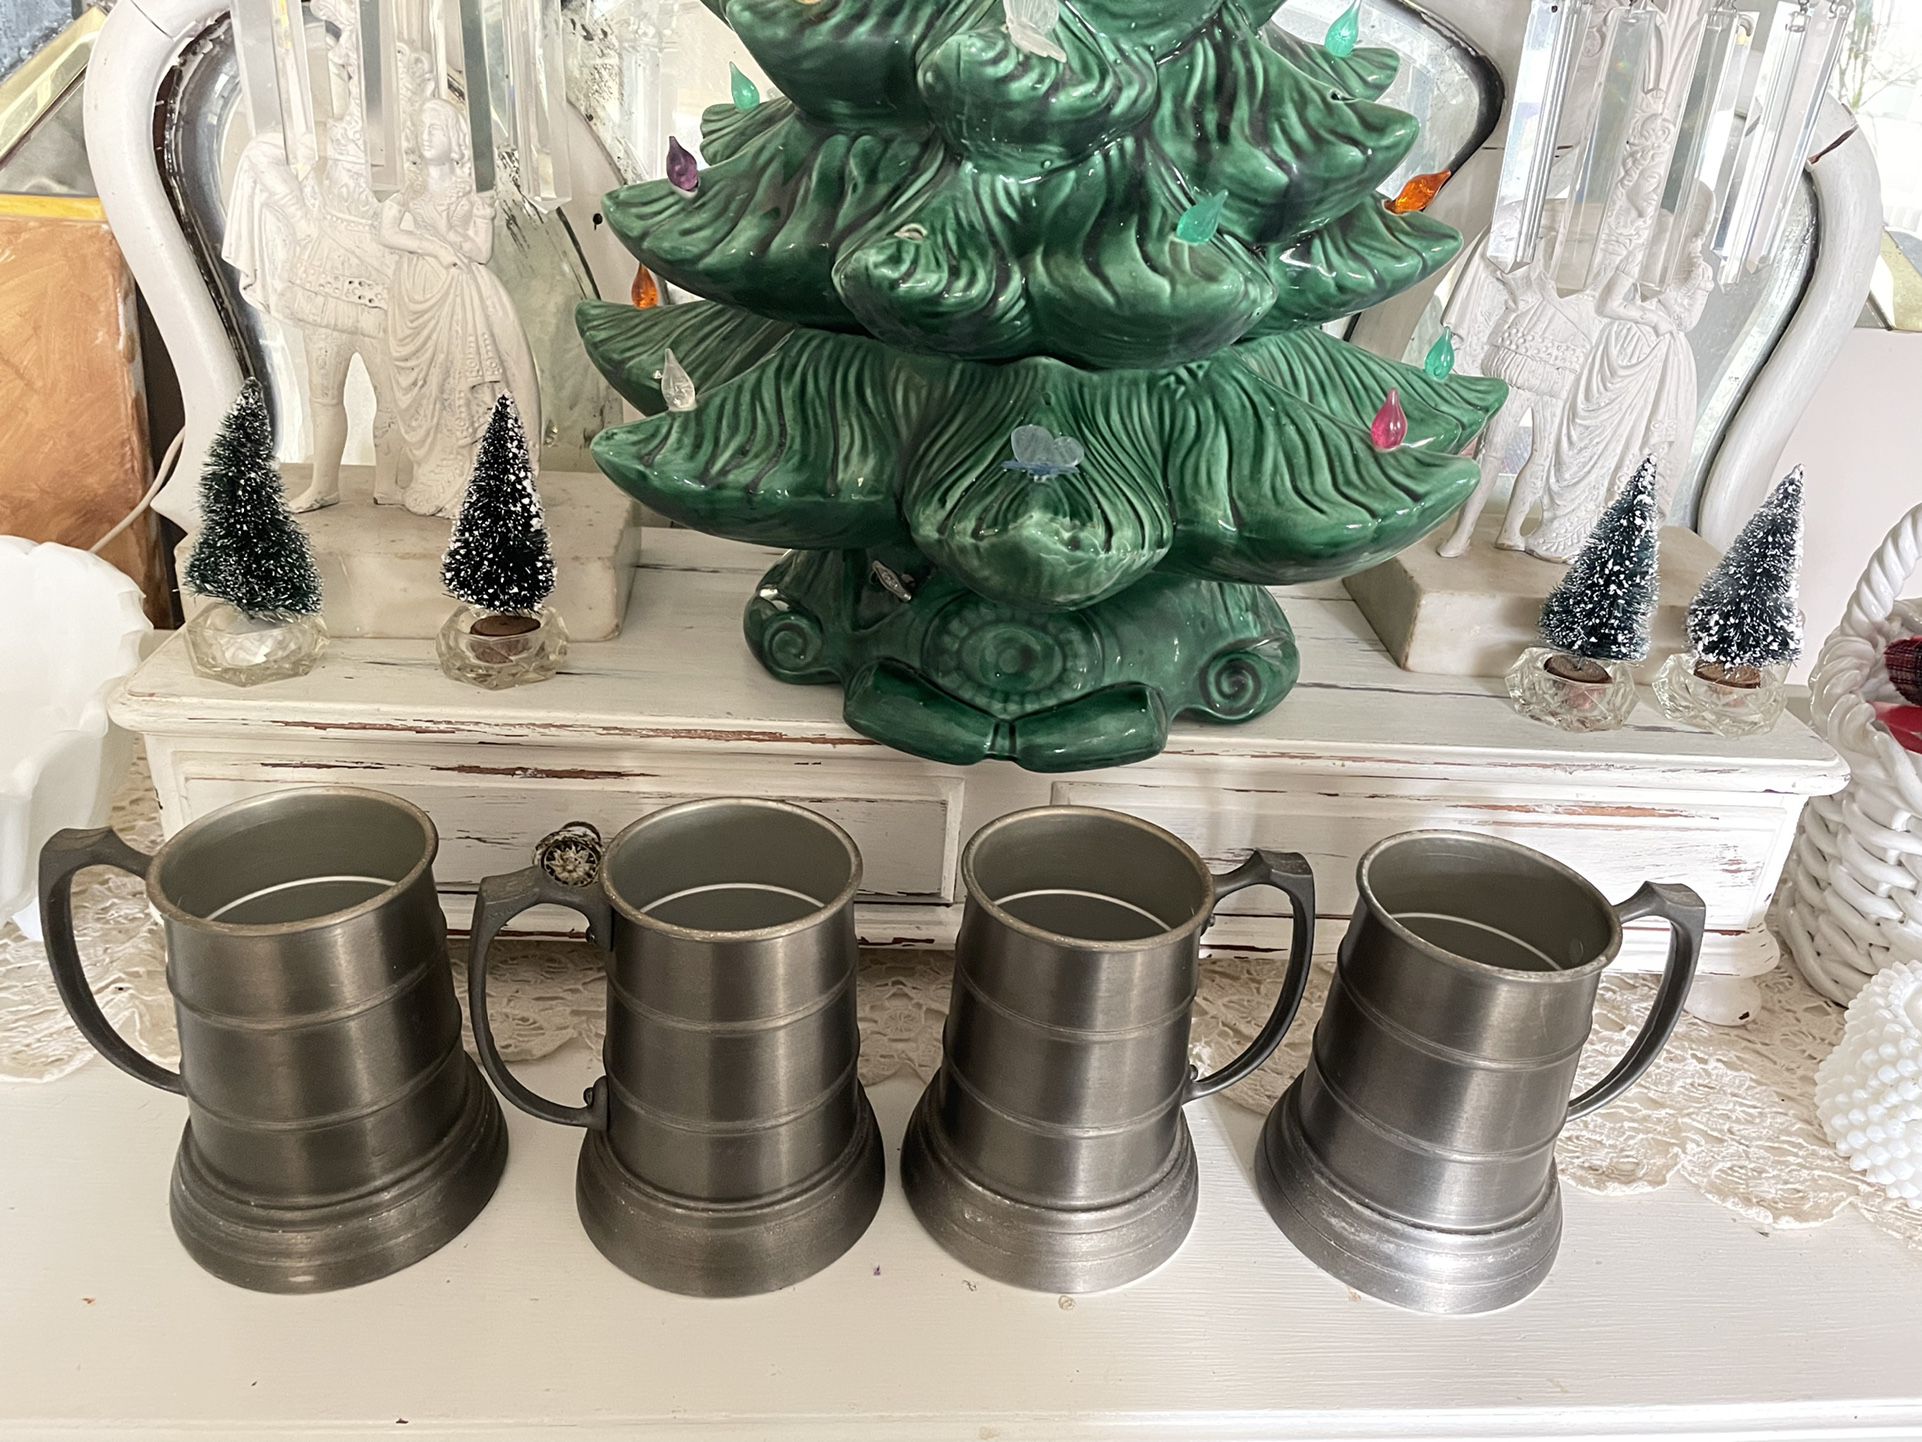 4 Pewter Tankard Beer Steins $20 For All